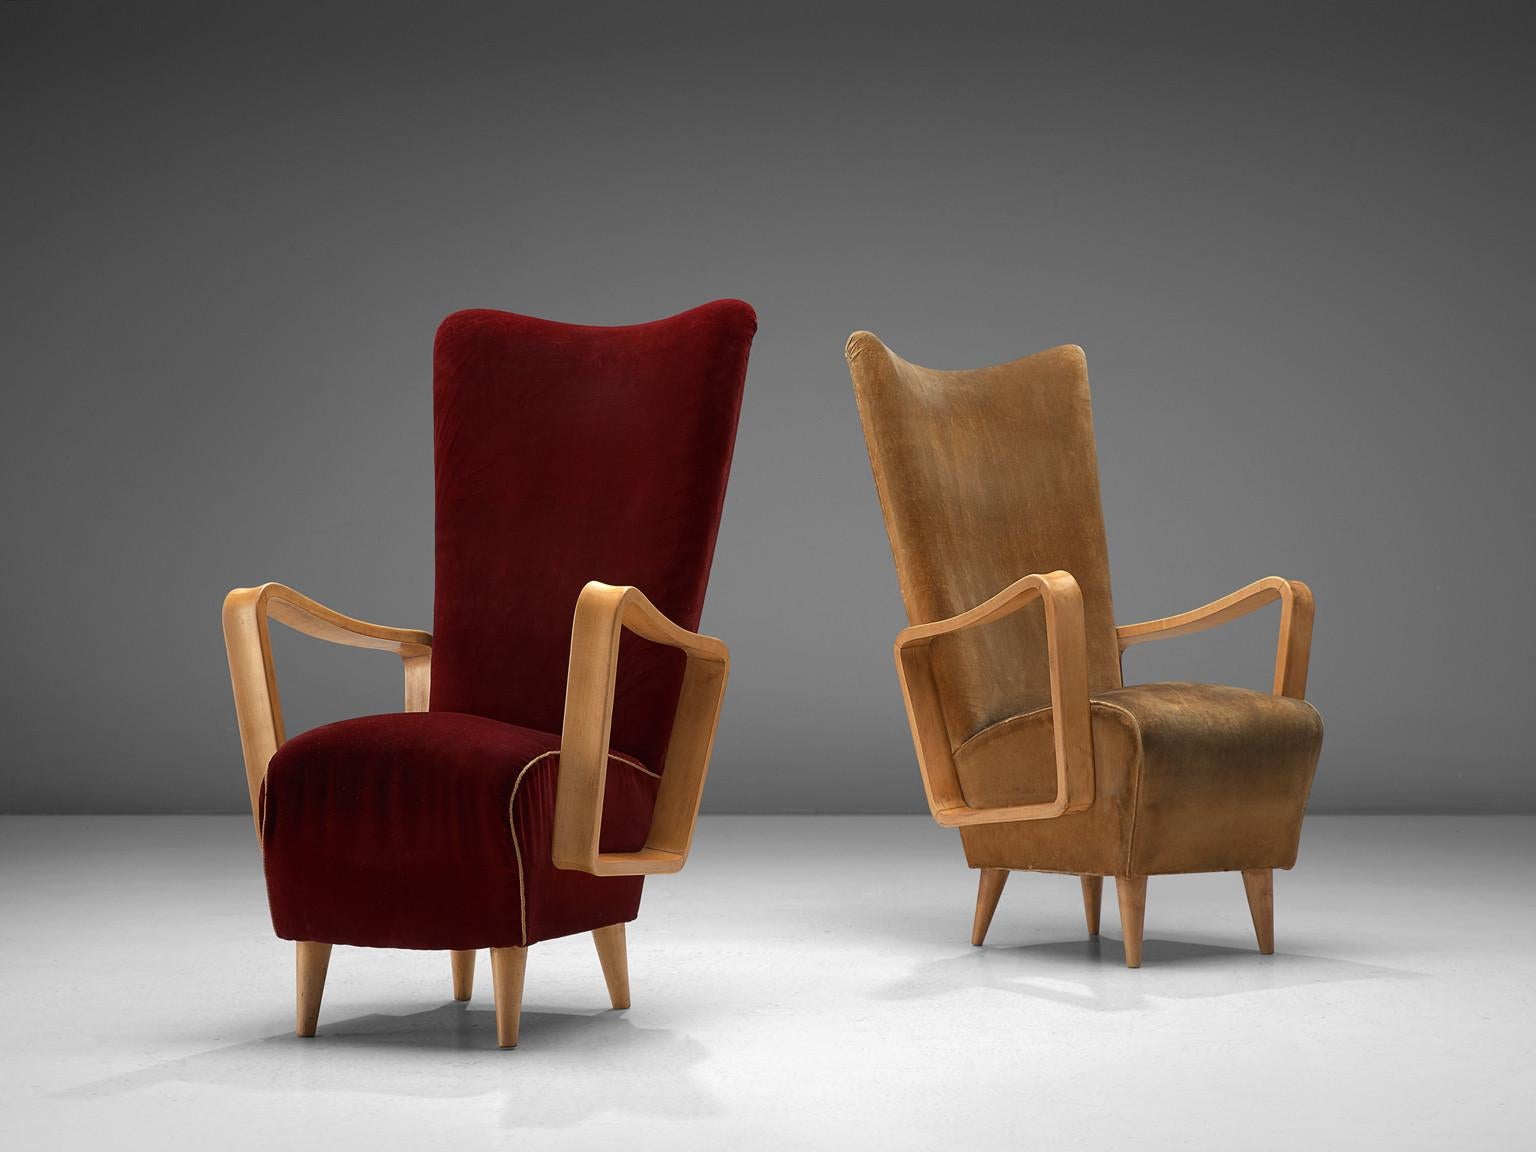 Pietro Lingeri, pair of easy chairs, beech, velvet upholstery, Italy, 1950s

This pair of high back armchairs has an elegant character. Beautifully curved yet sharp rounded edges create a rather special appearance. The back forms a beautiful long